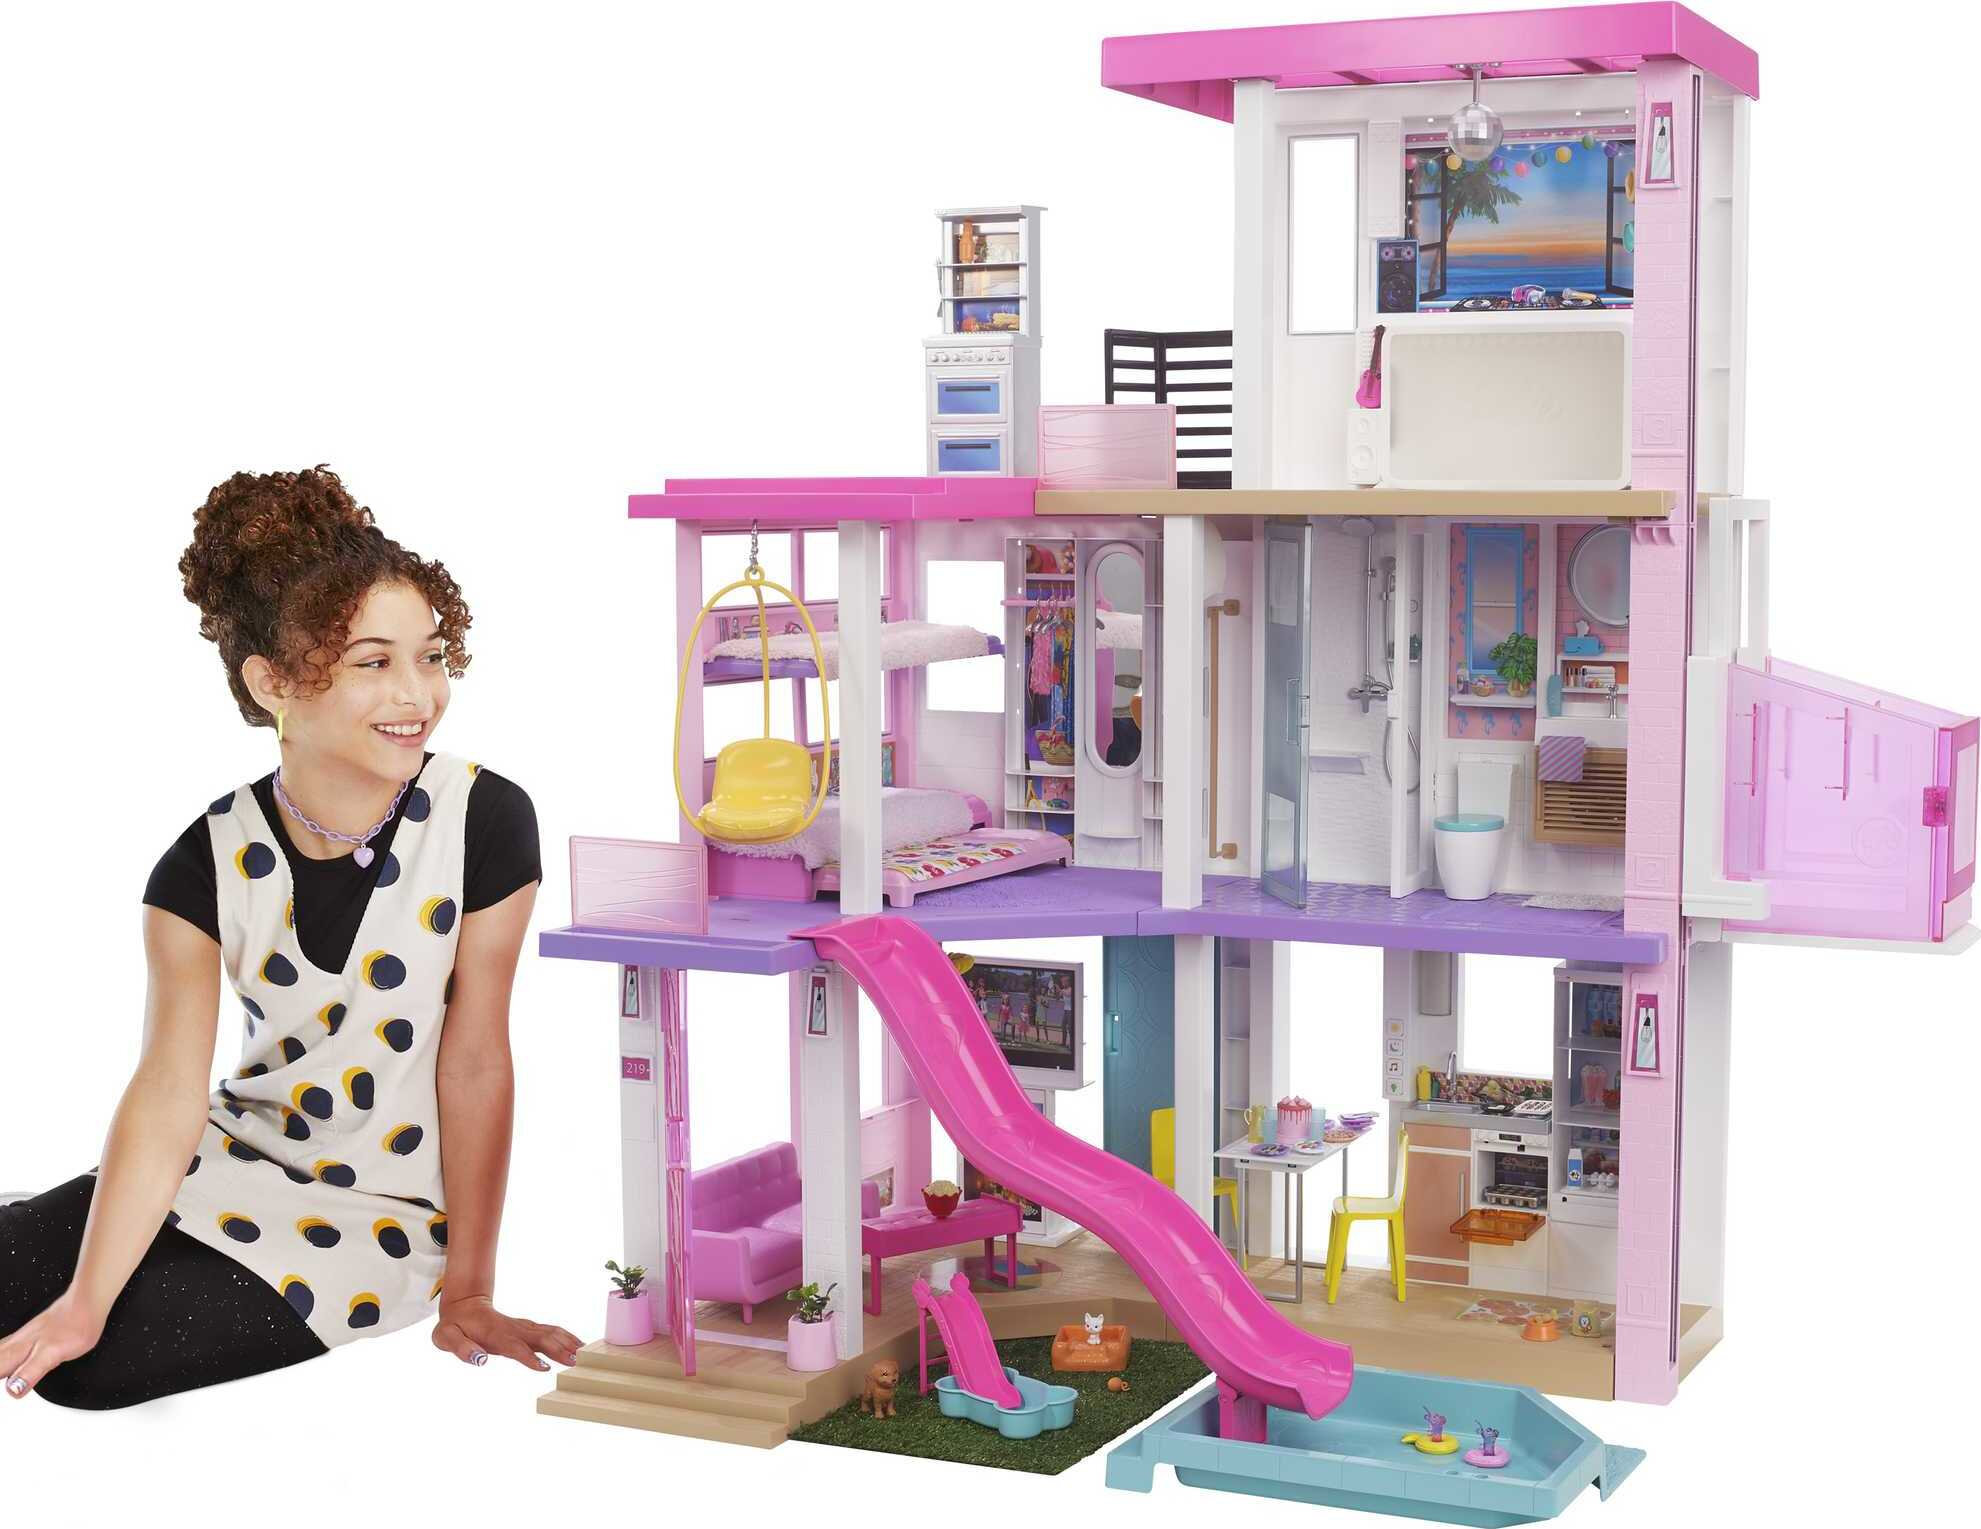 Barbie DreamHouse Playset with 10 Play Areas, 75+ Furniture & Accessories, Lights & Sounds - image 1 of 9